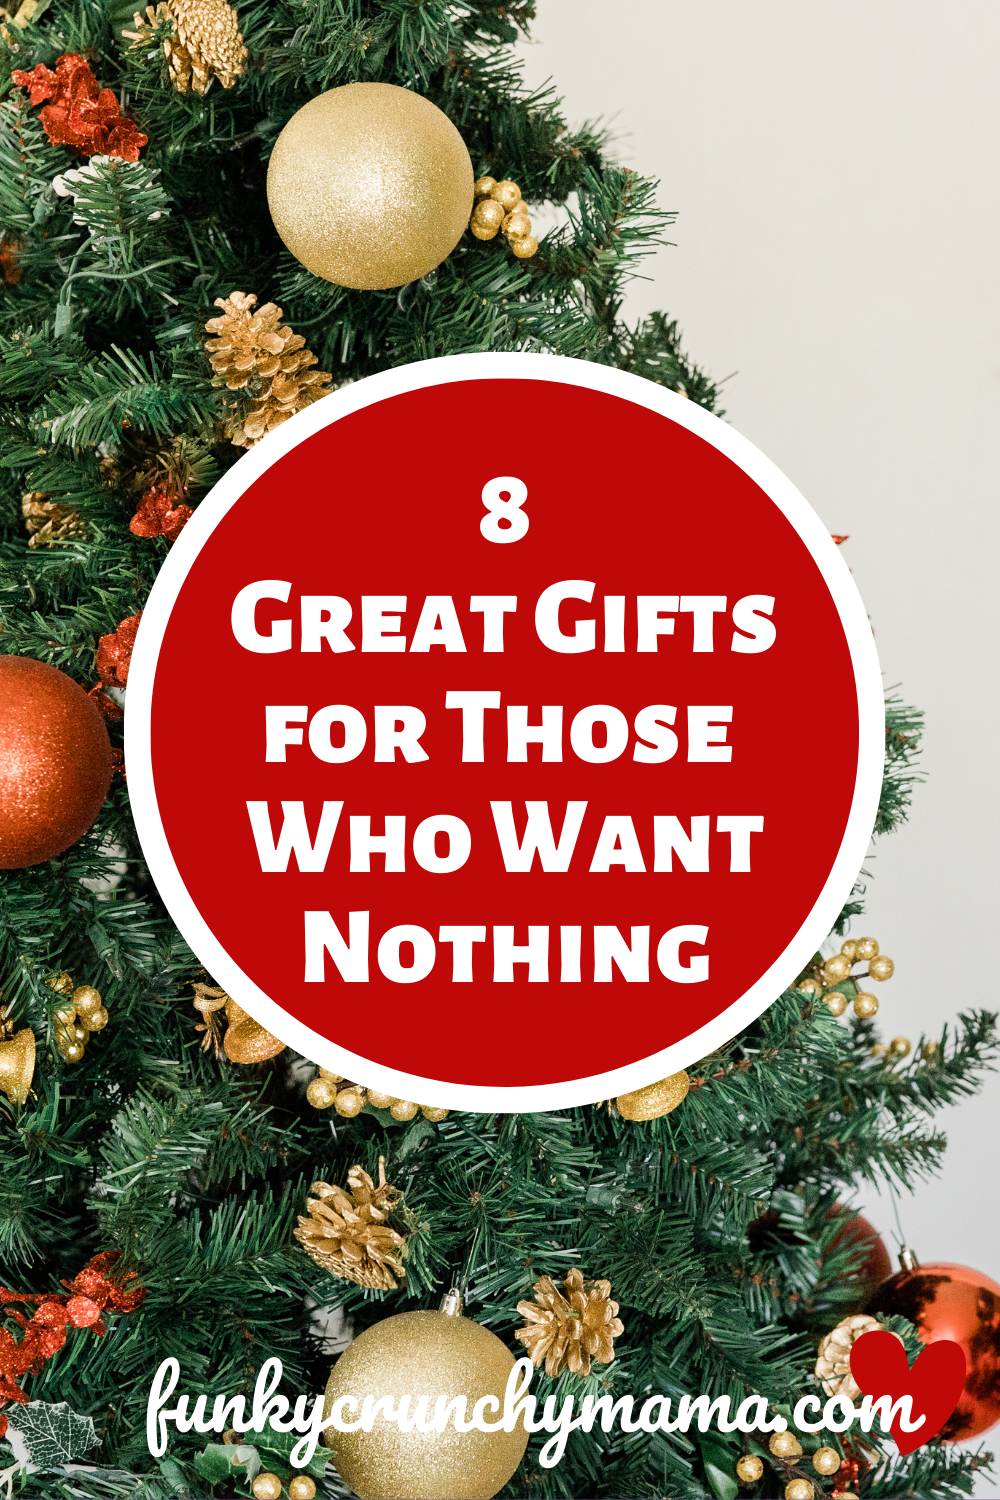 Pinterest image for article titled "8 Great Gifts for Those Who Want Nothing." Features a decorated pine tree on white background. Site URL funkycrunchymama.com is written along the bottom.